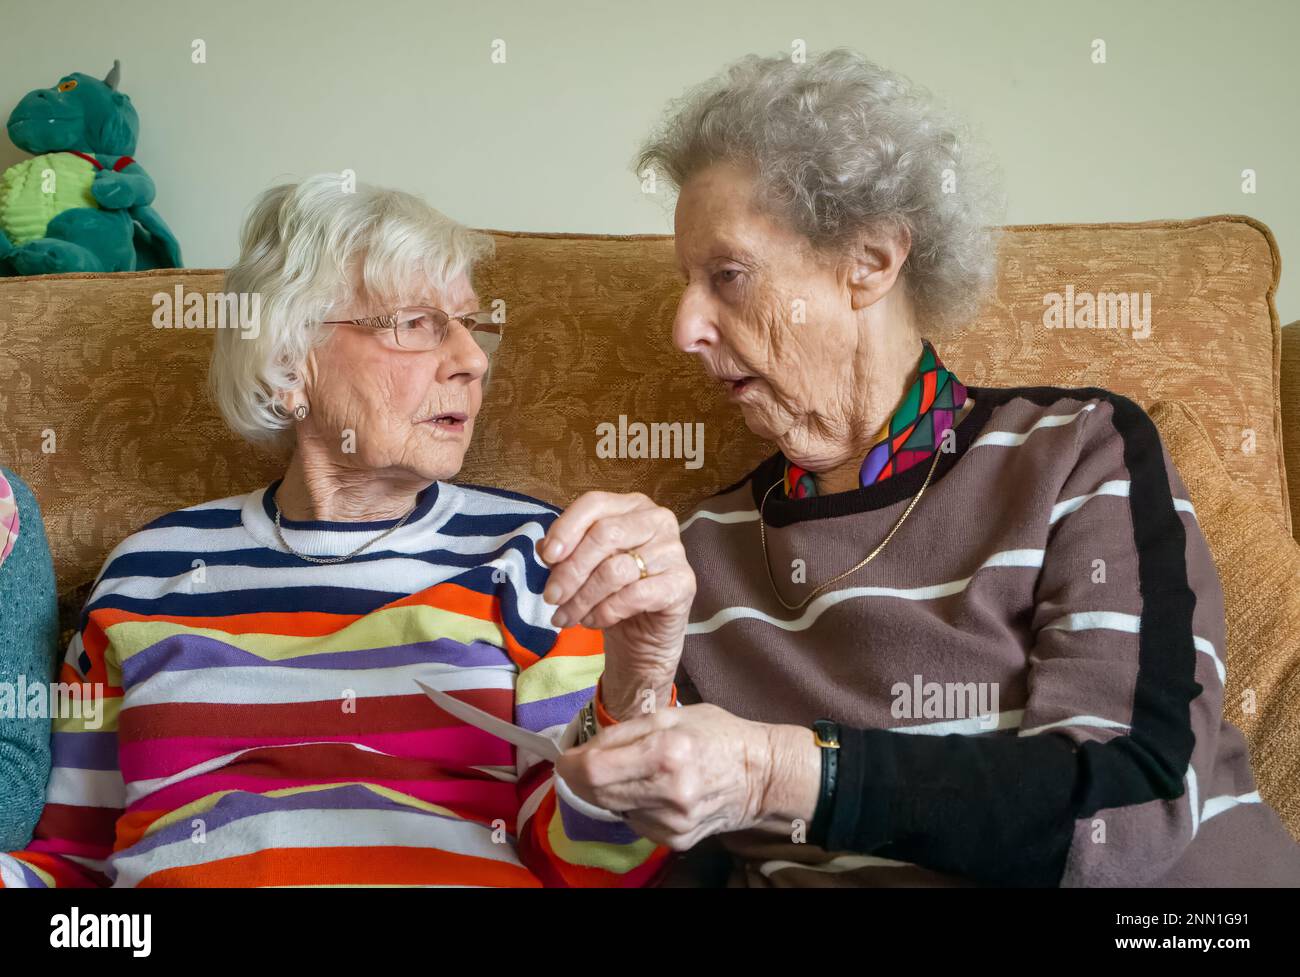 Two elderly women in their 90s who are lifelong friends sit, look at a photograph and chat about the old days. Stock Photo